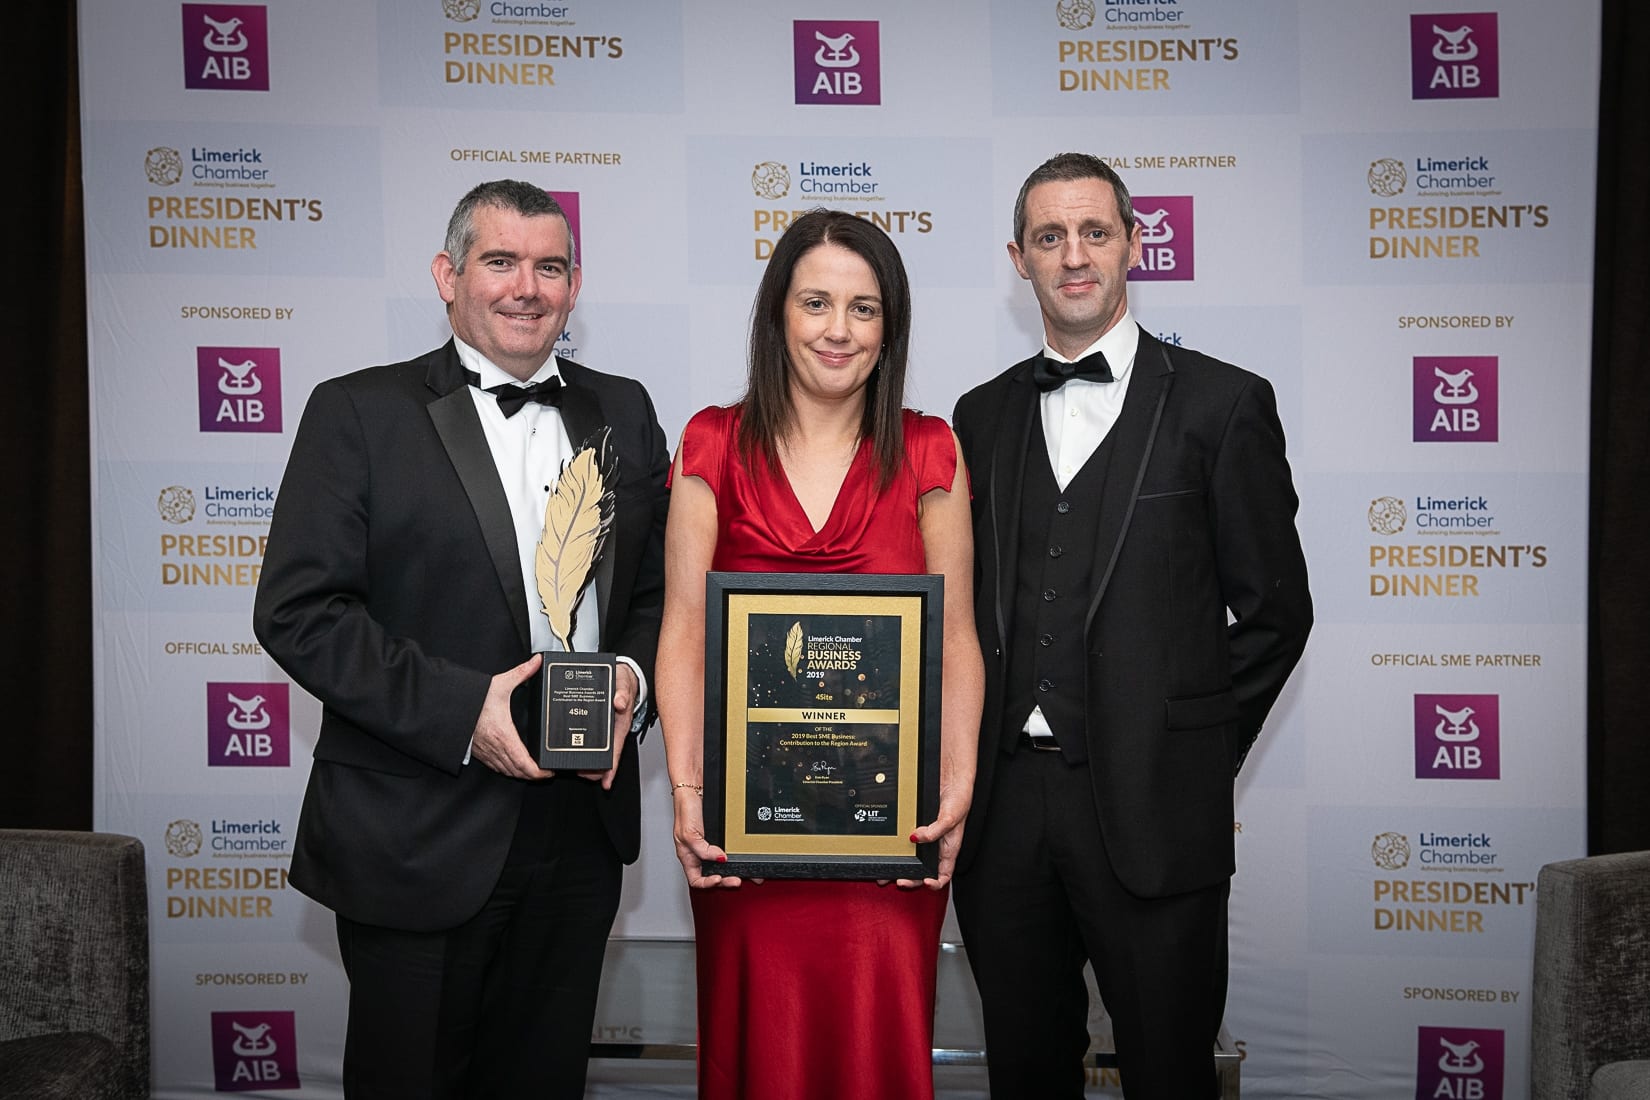 No repro fee-Limerick Chamber President’s Dinner
and Limerick Chamber Regional Business Awards 2019 which was held in the Strand Hotel on Friday 15th November /Best SME /  - From Left to Right: Mark and Helen O’Connor - WINNER / 4Site, Kieran Considine - AIB / Sponsor 
Photo credit Shauna Kennedy